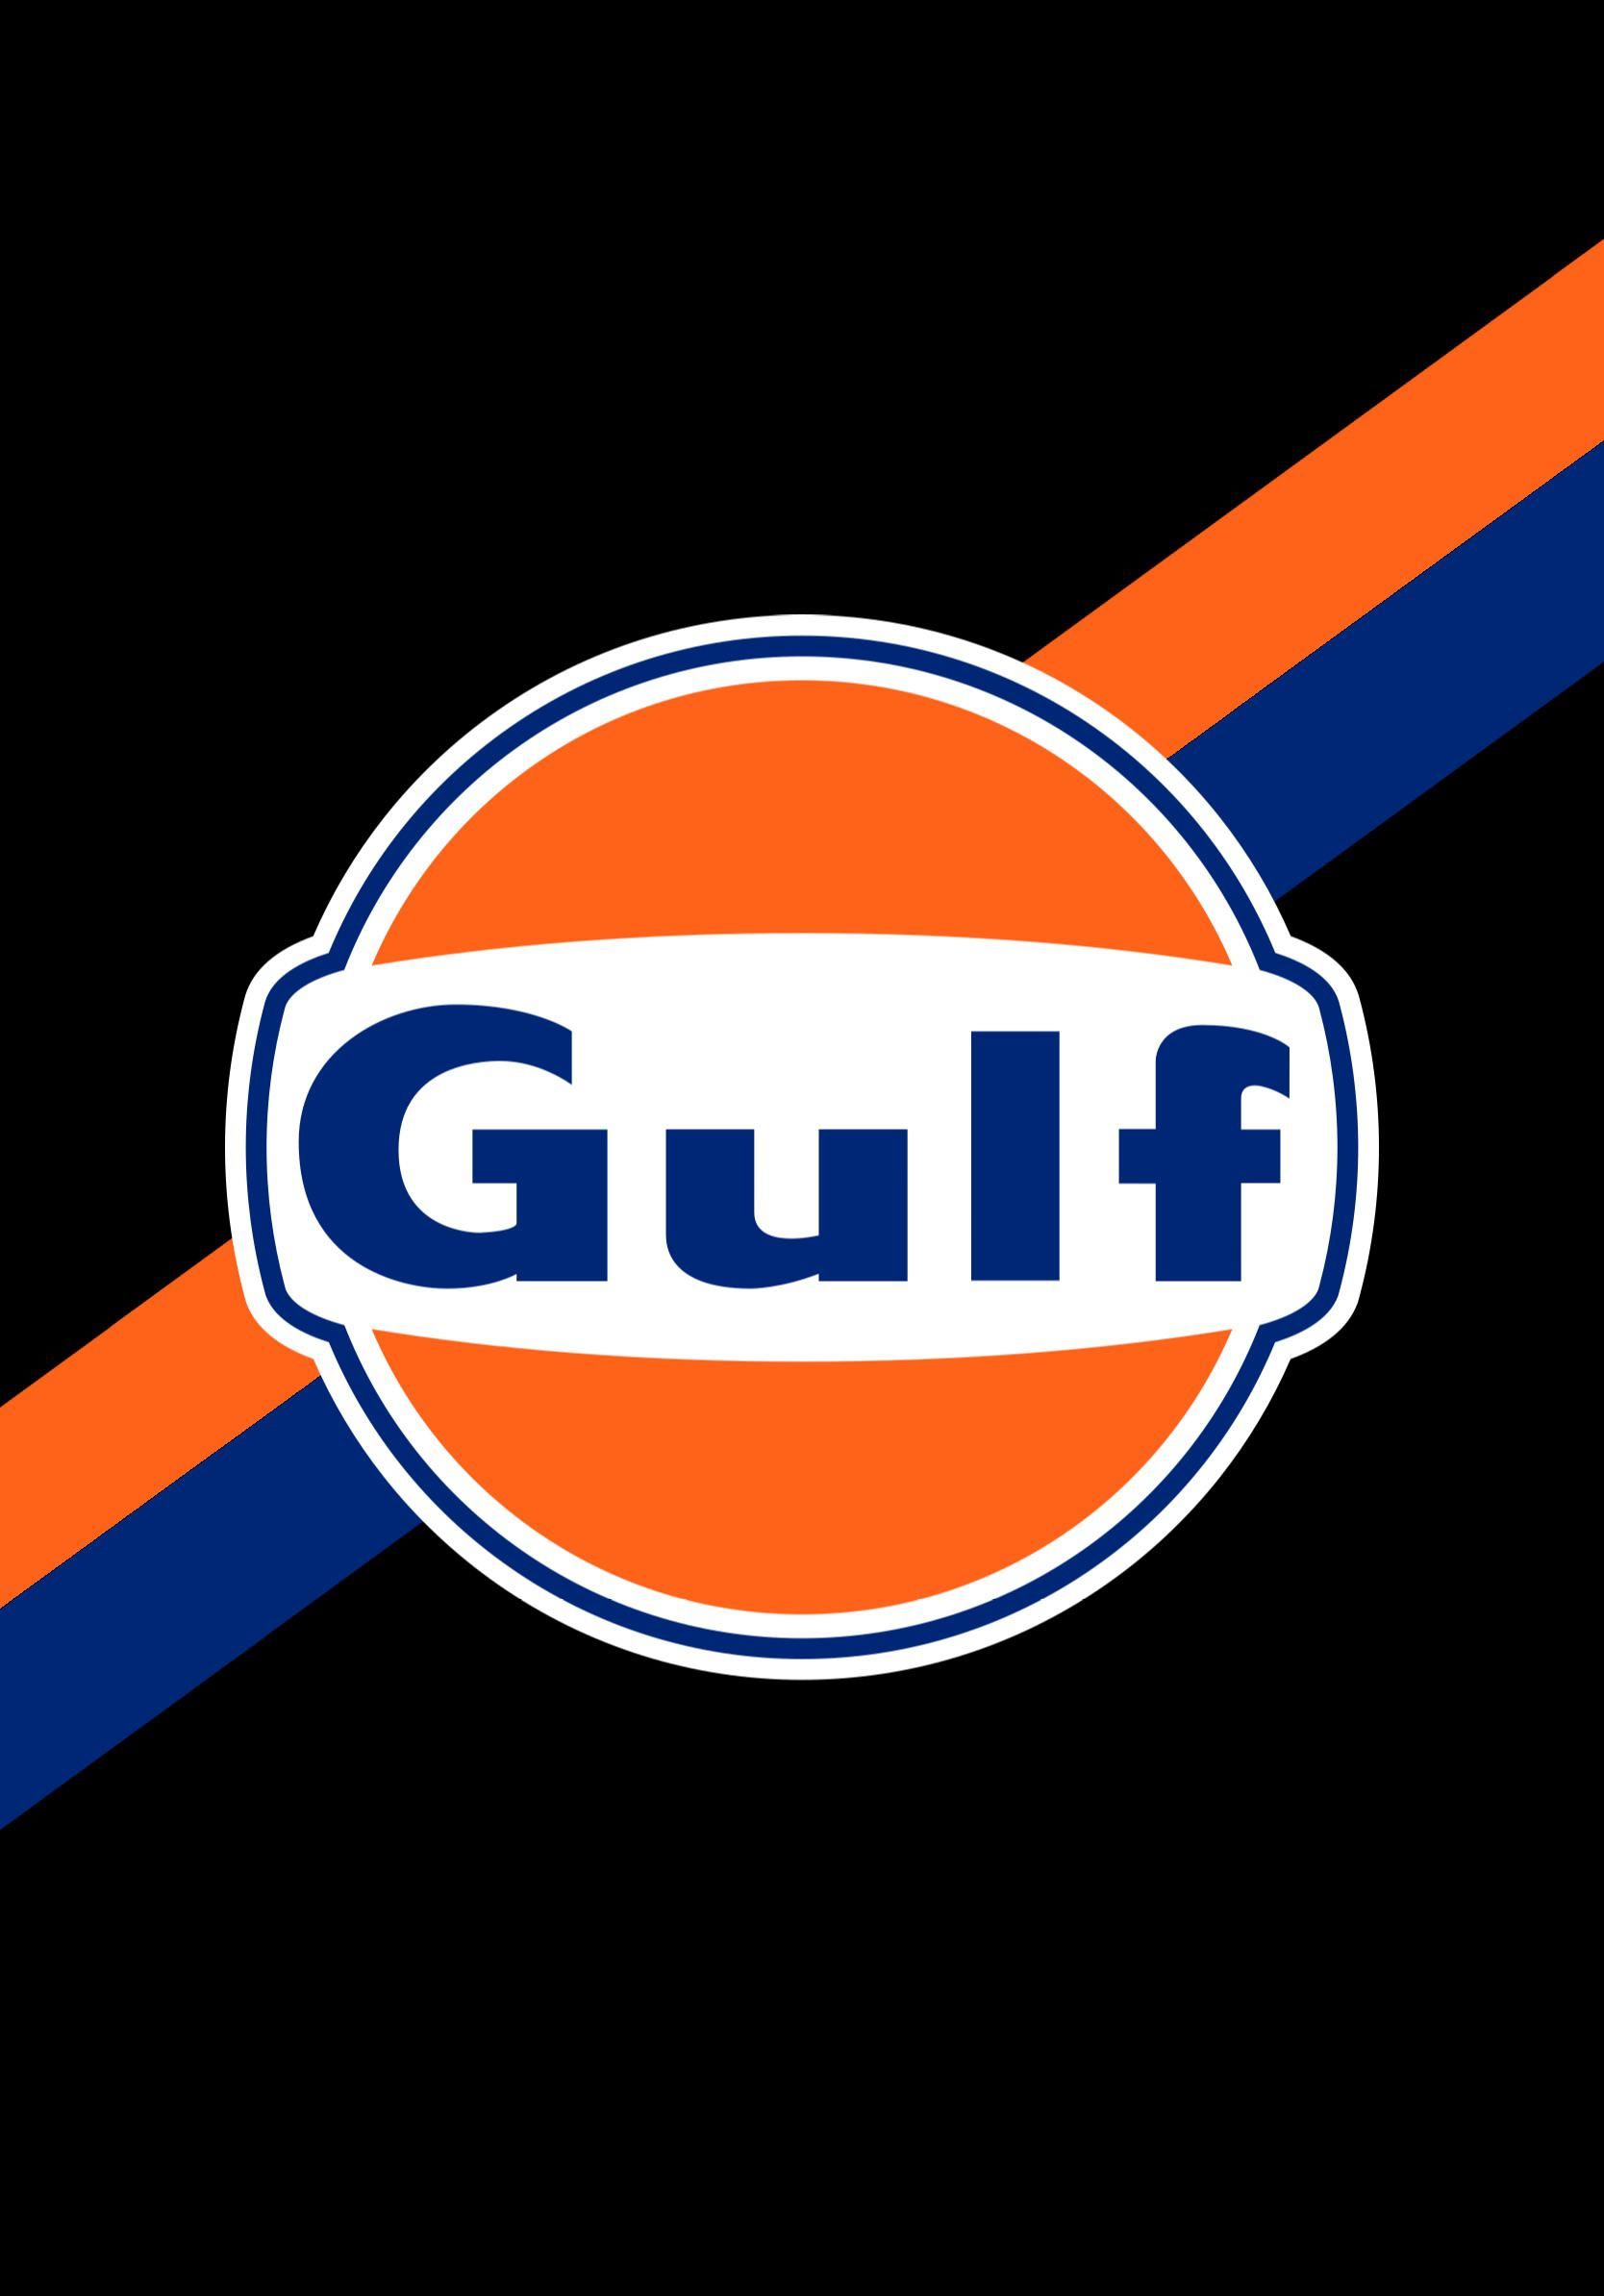 Gulf Oil wallpaper (optimised for iPad Pro 11) for those of you who you know enjoy o. Wallpaper iphone love, Inspirational phone wallpaper, Phone wallpaper quotes